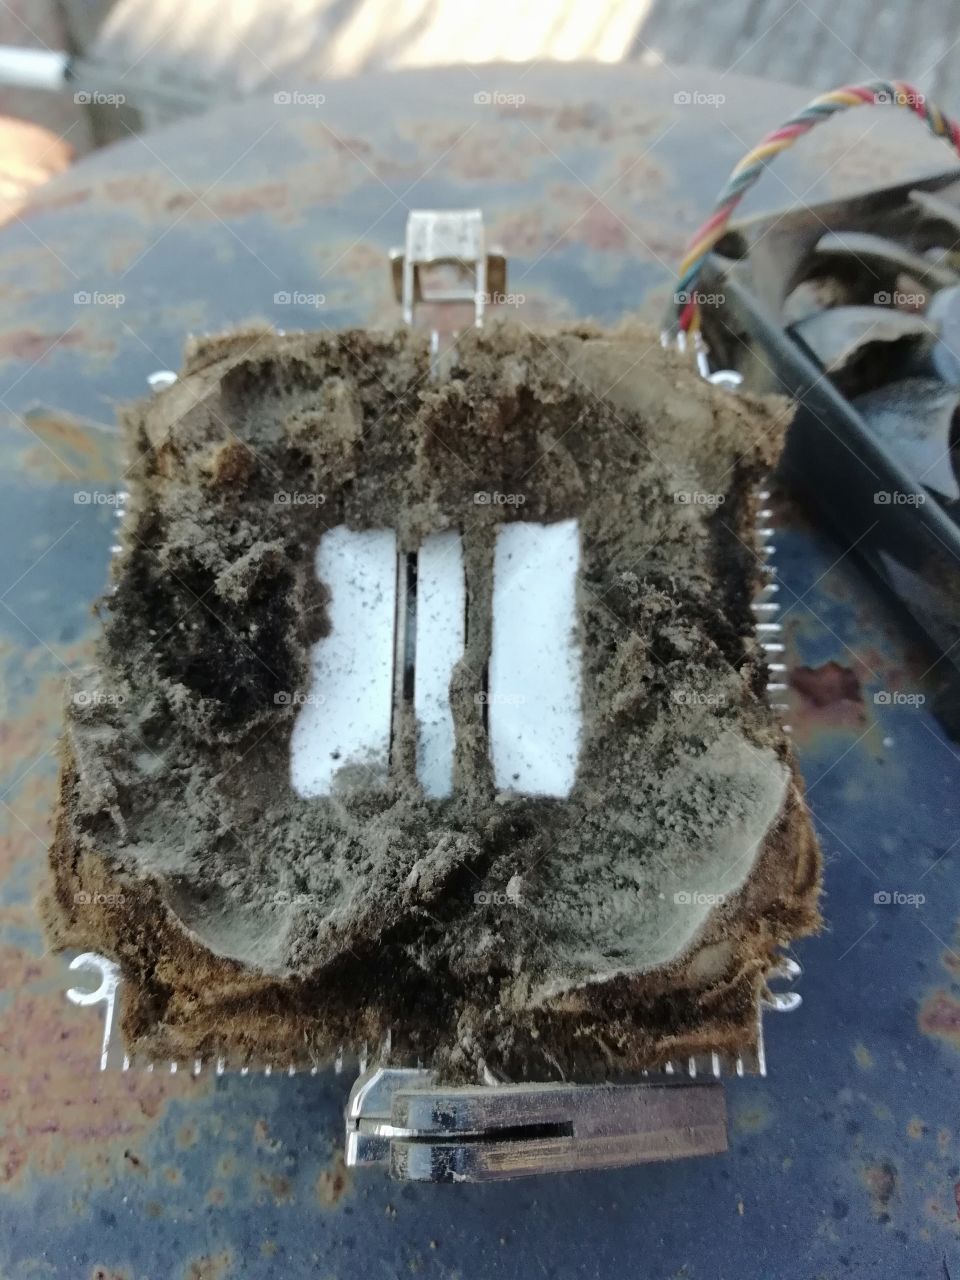 Don't forget to clean your cpu cooler guys!!!